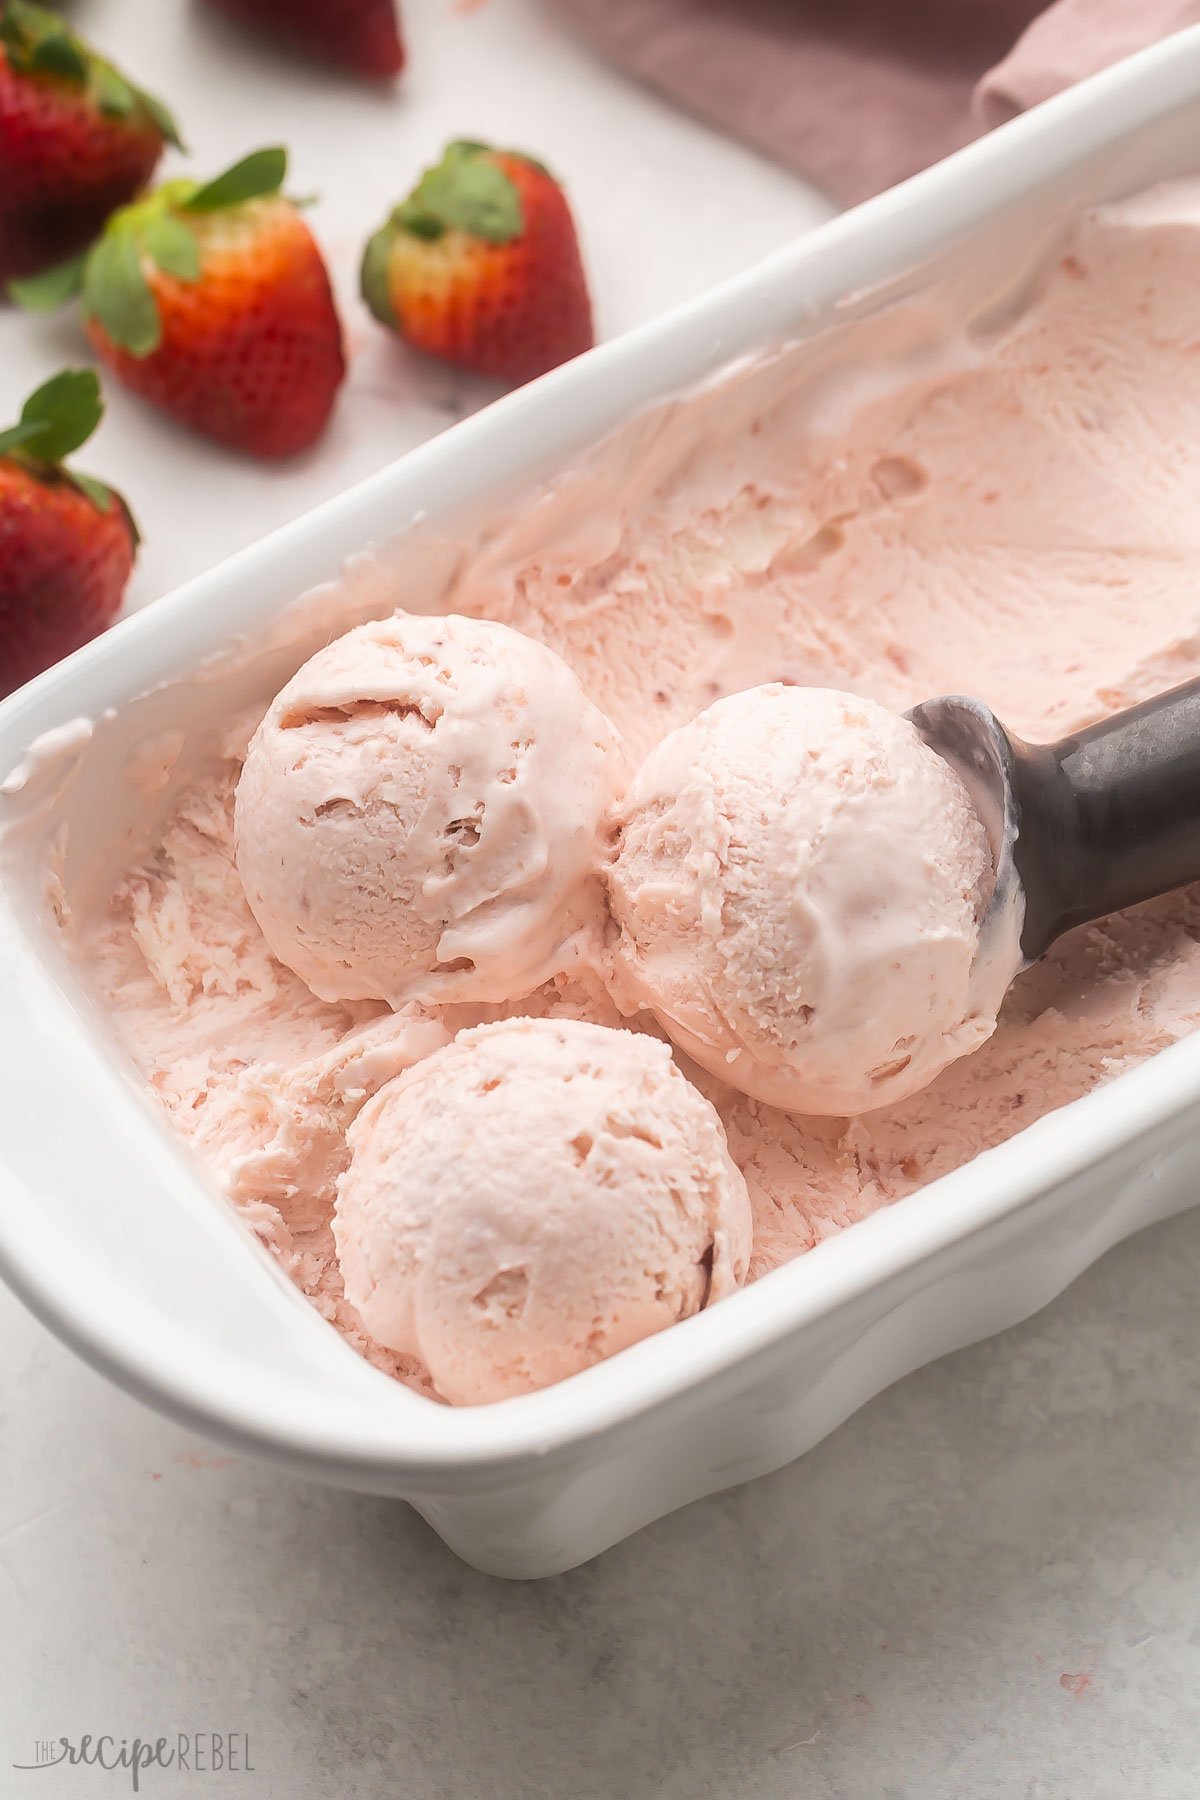 White dish filled with strawberry ice cream in it, being scooped out by an ice cream scoop. 